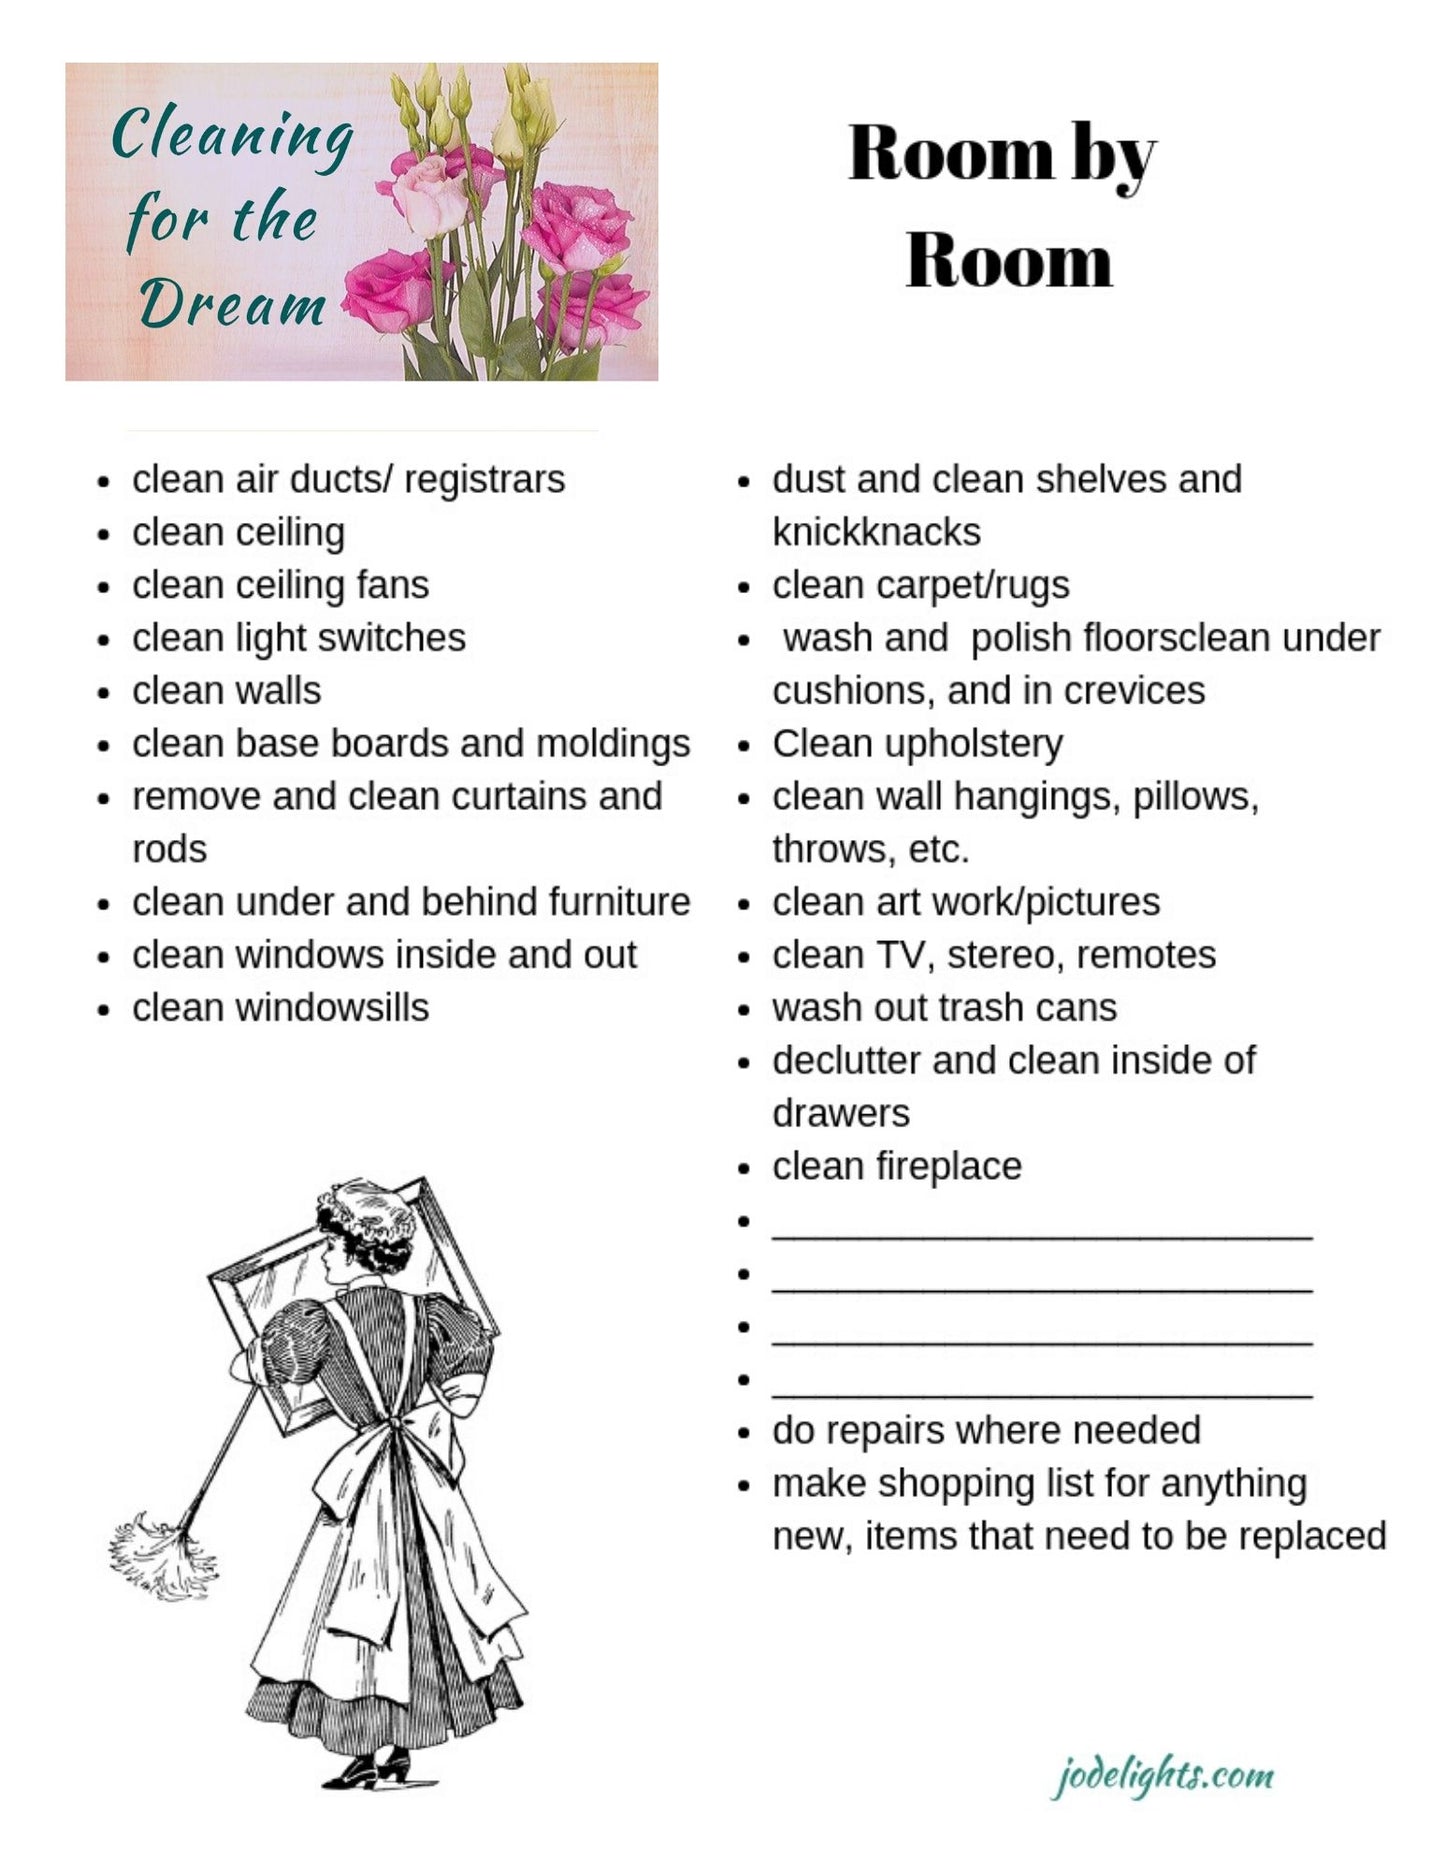 Cleaning for the Dream Guide and Worksheets PDF